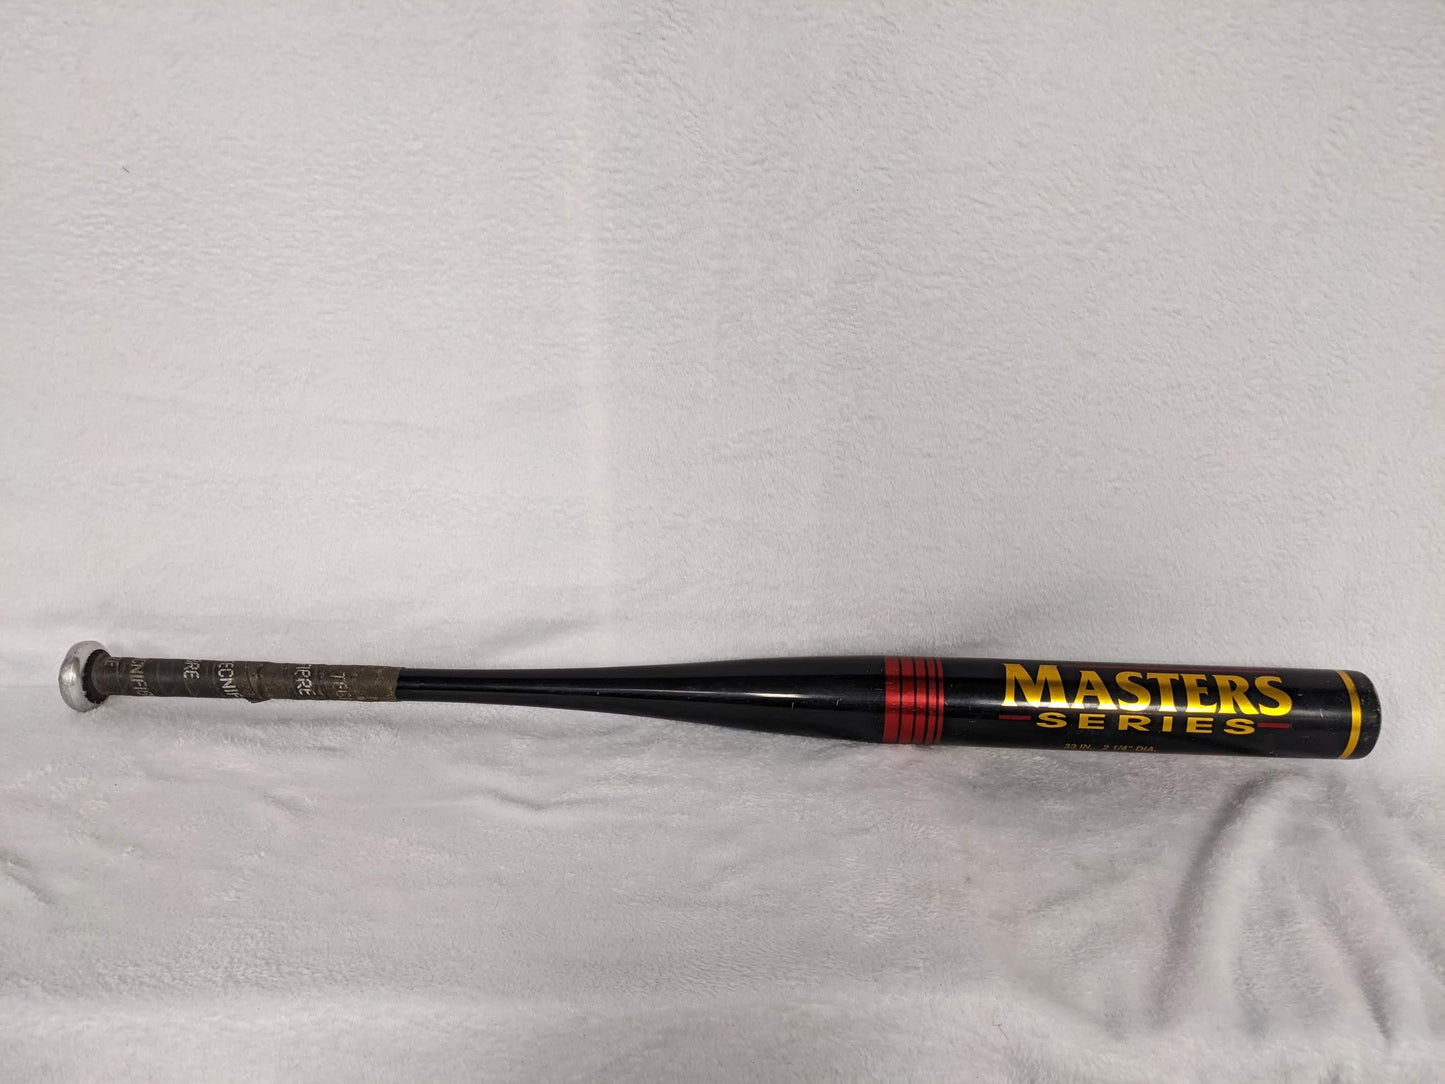 Masters Series Rotary Grip Girls Softball Bat Size 33 In 29 Oz Color Black Condition Used